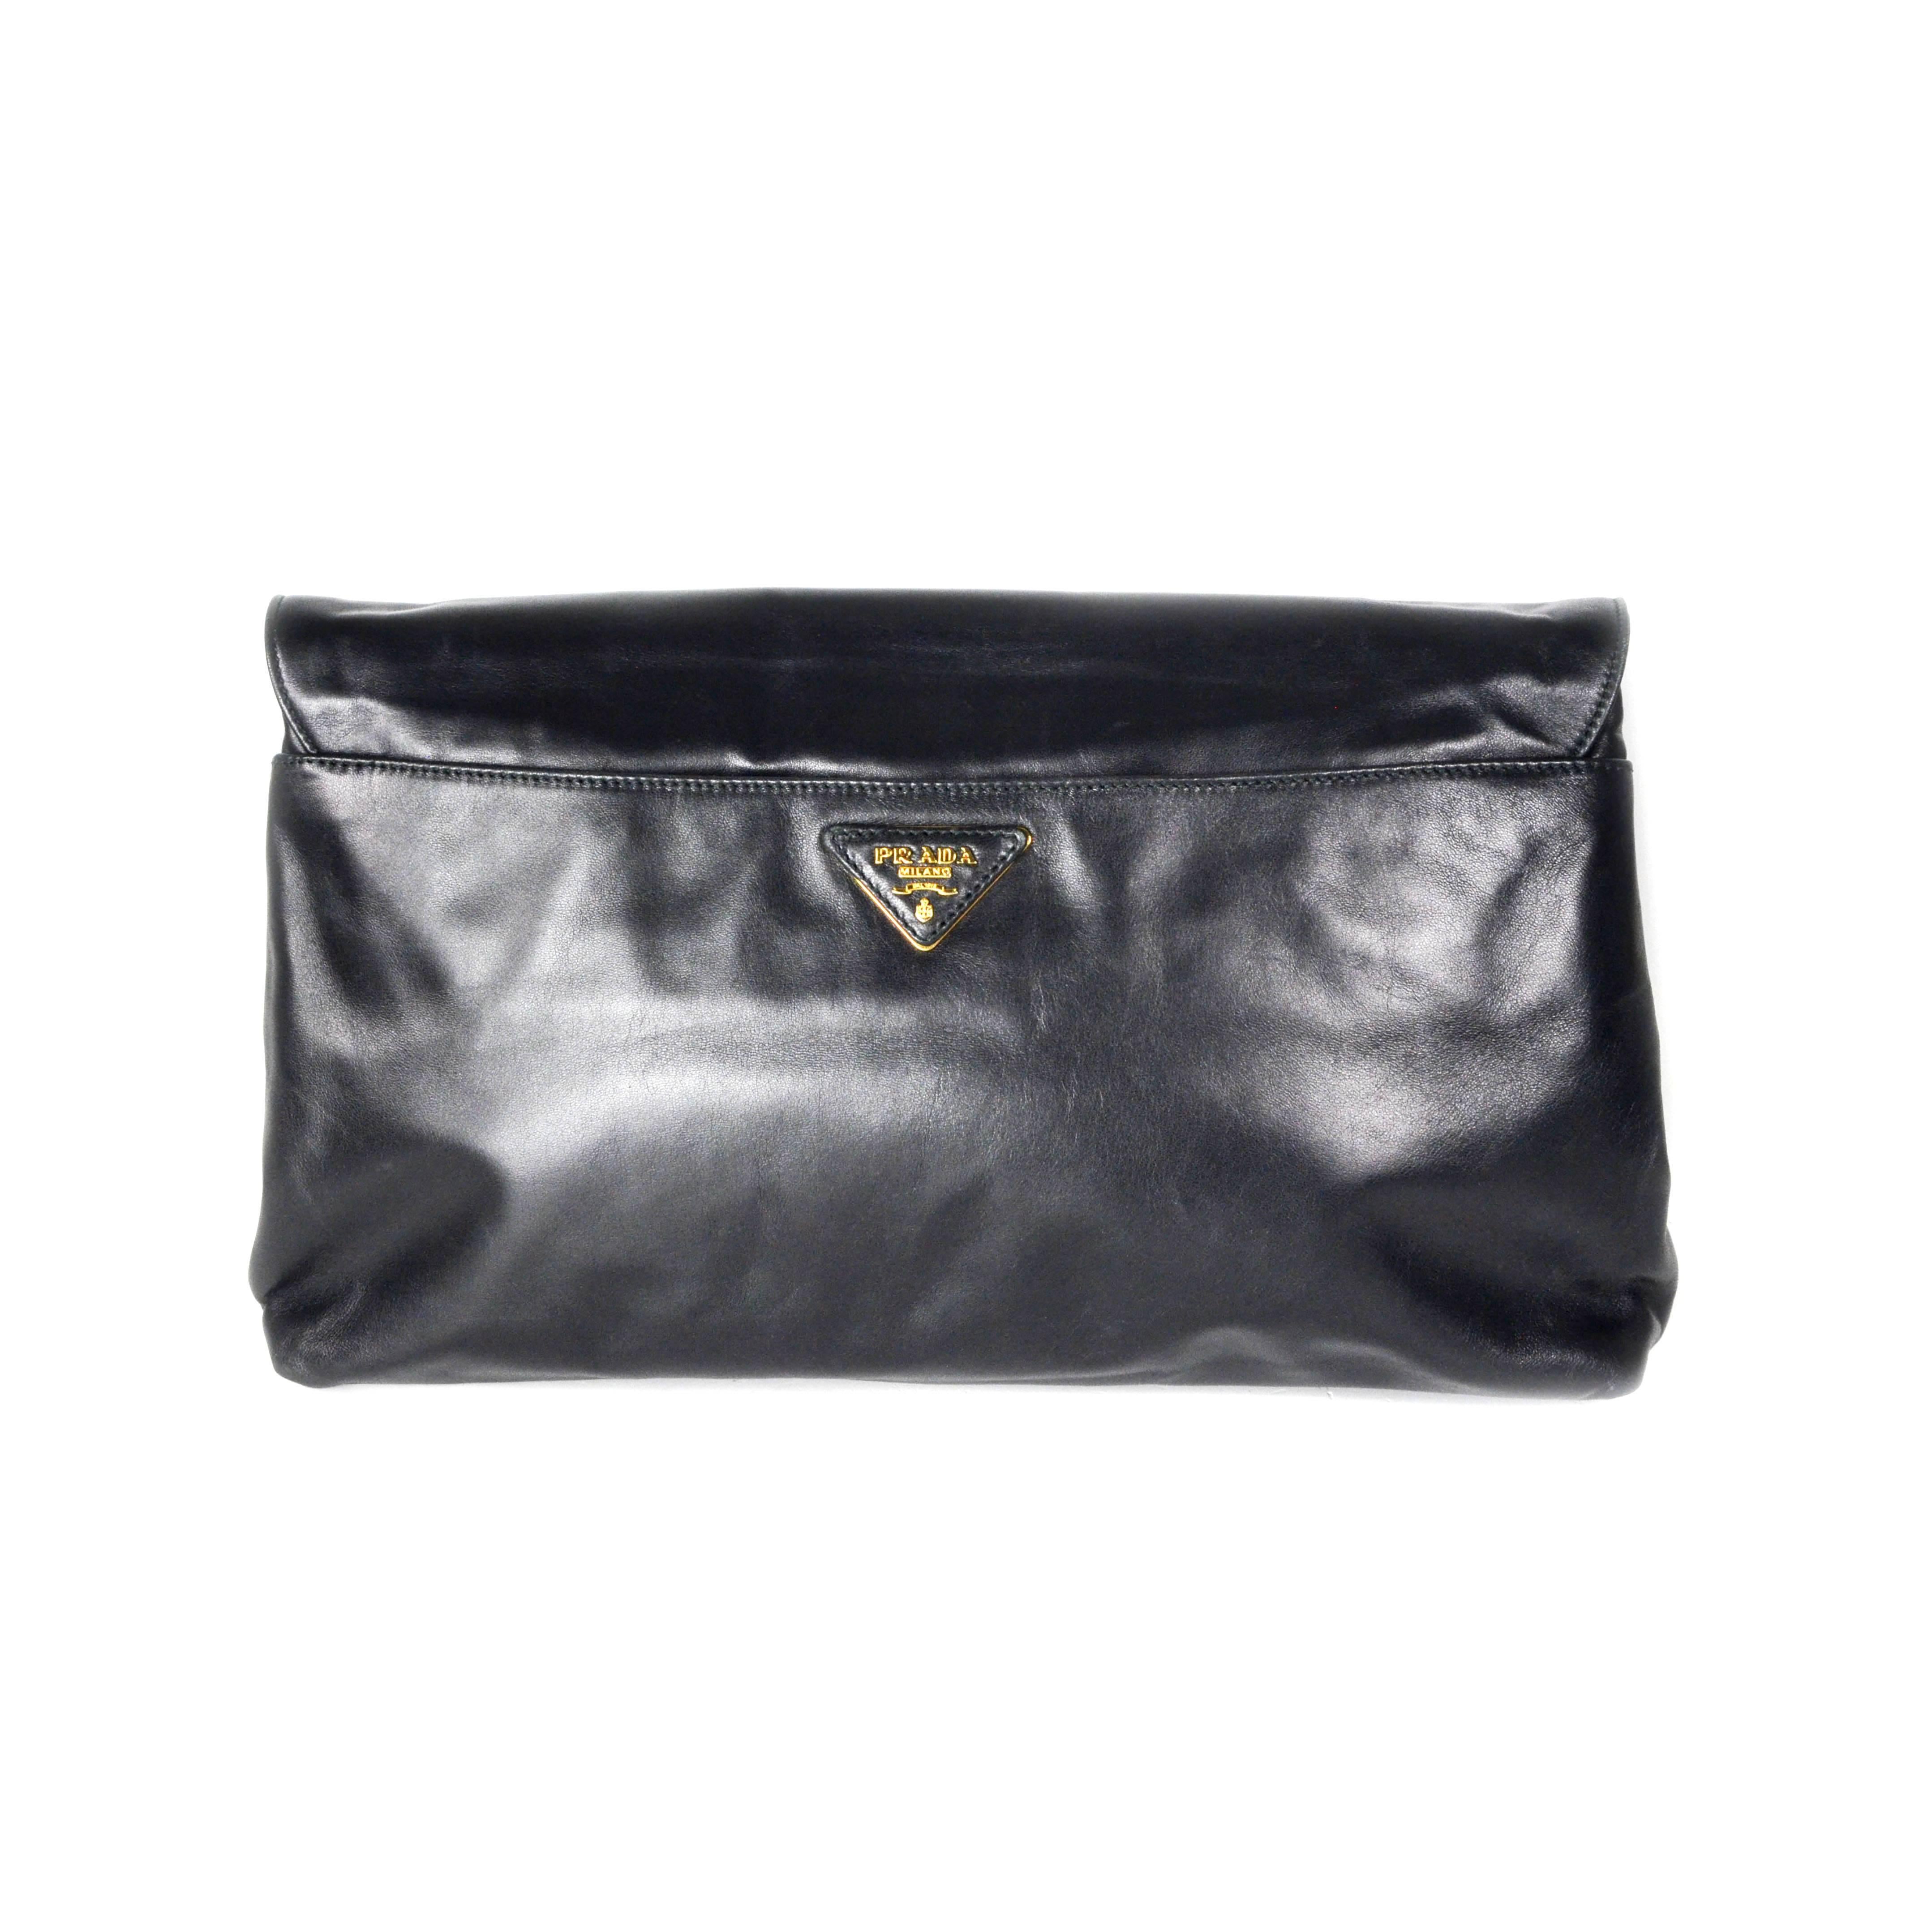 Prada - Smoking Lips Large Clutch

Color: Black 

Material: Leather

------------------------------------------------------------
Details:

- mouth smoking graphic at front

- gold tone hardware

- snap button closures

- four interior zip